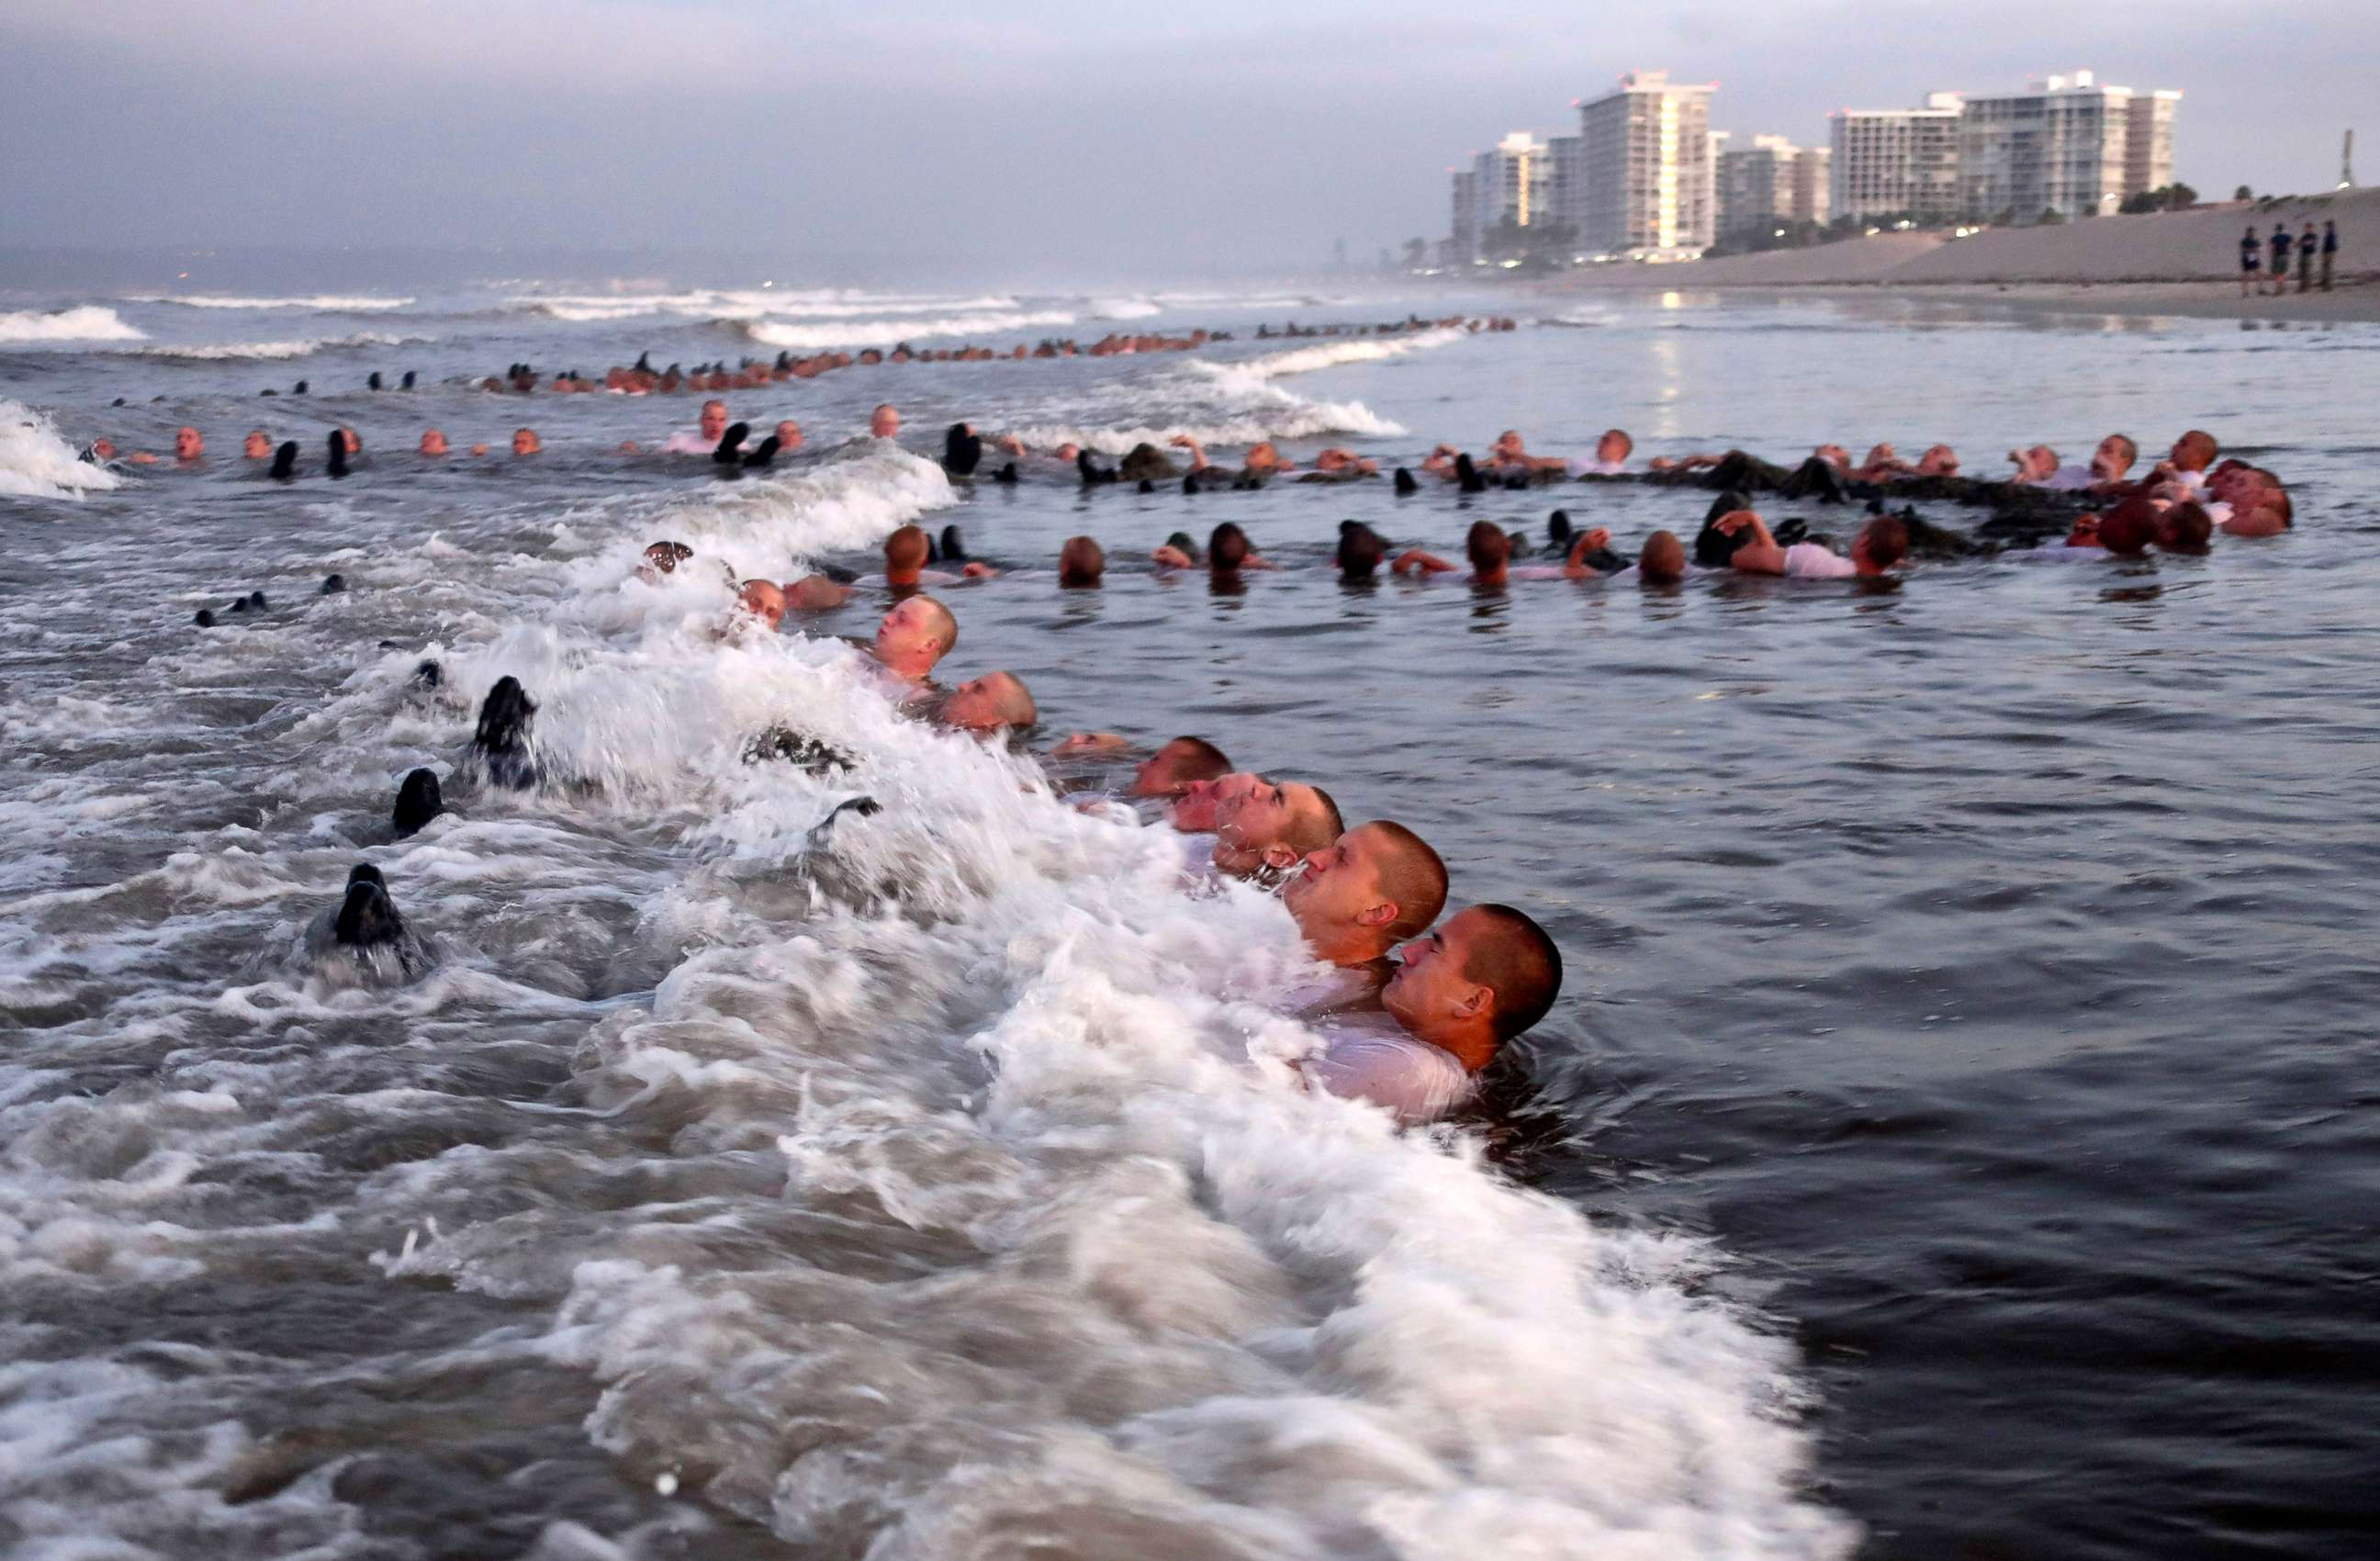 PHOTO: U.S. Navy SEAL candidates participate in "surf immersion" during Basic Underwater Demolition/SEAL (BUD/S) training at the Naval Special Warfare (NSW) Center in Coronado, Calif., on May 4, 2020.